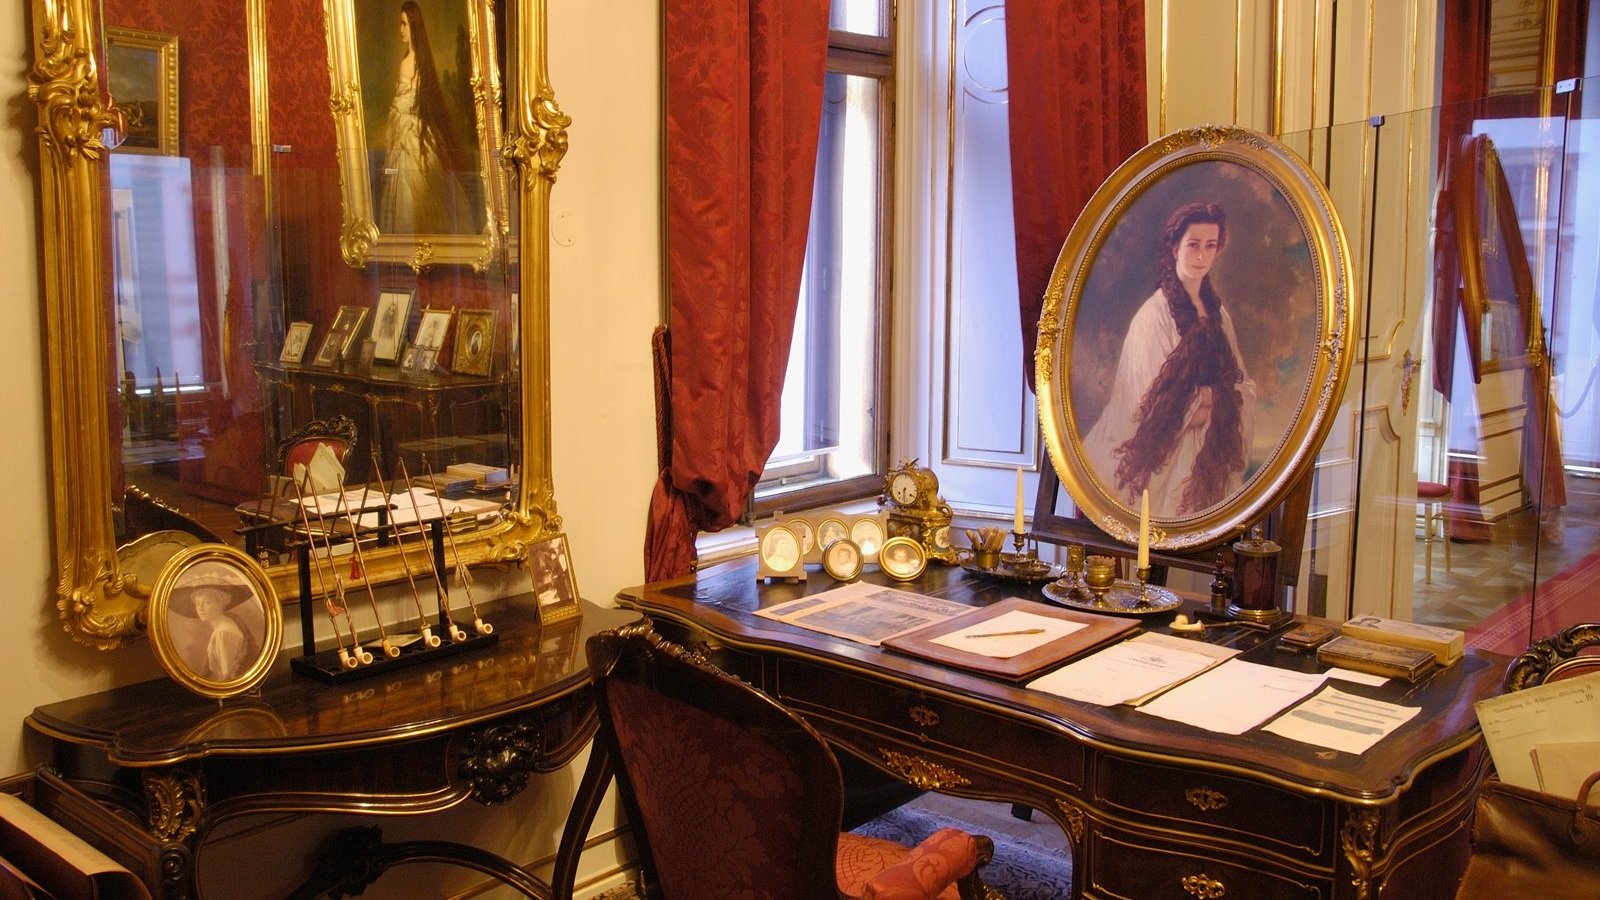 Memories of Sissi in the Imperial Apartments, Vienna